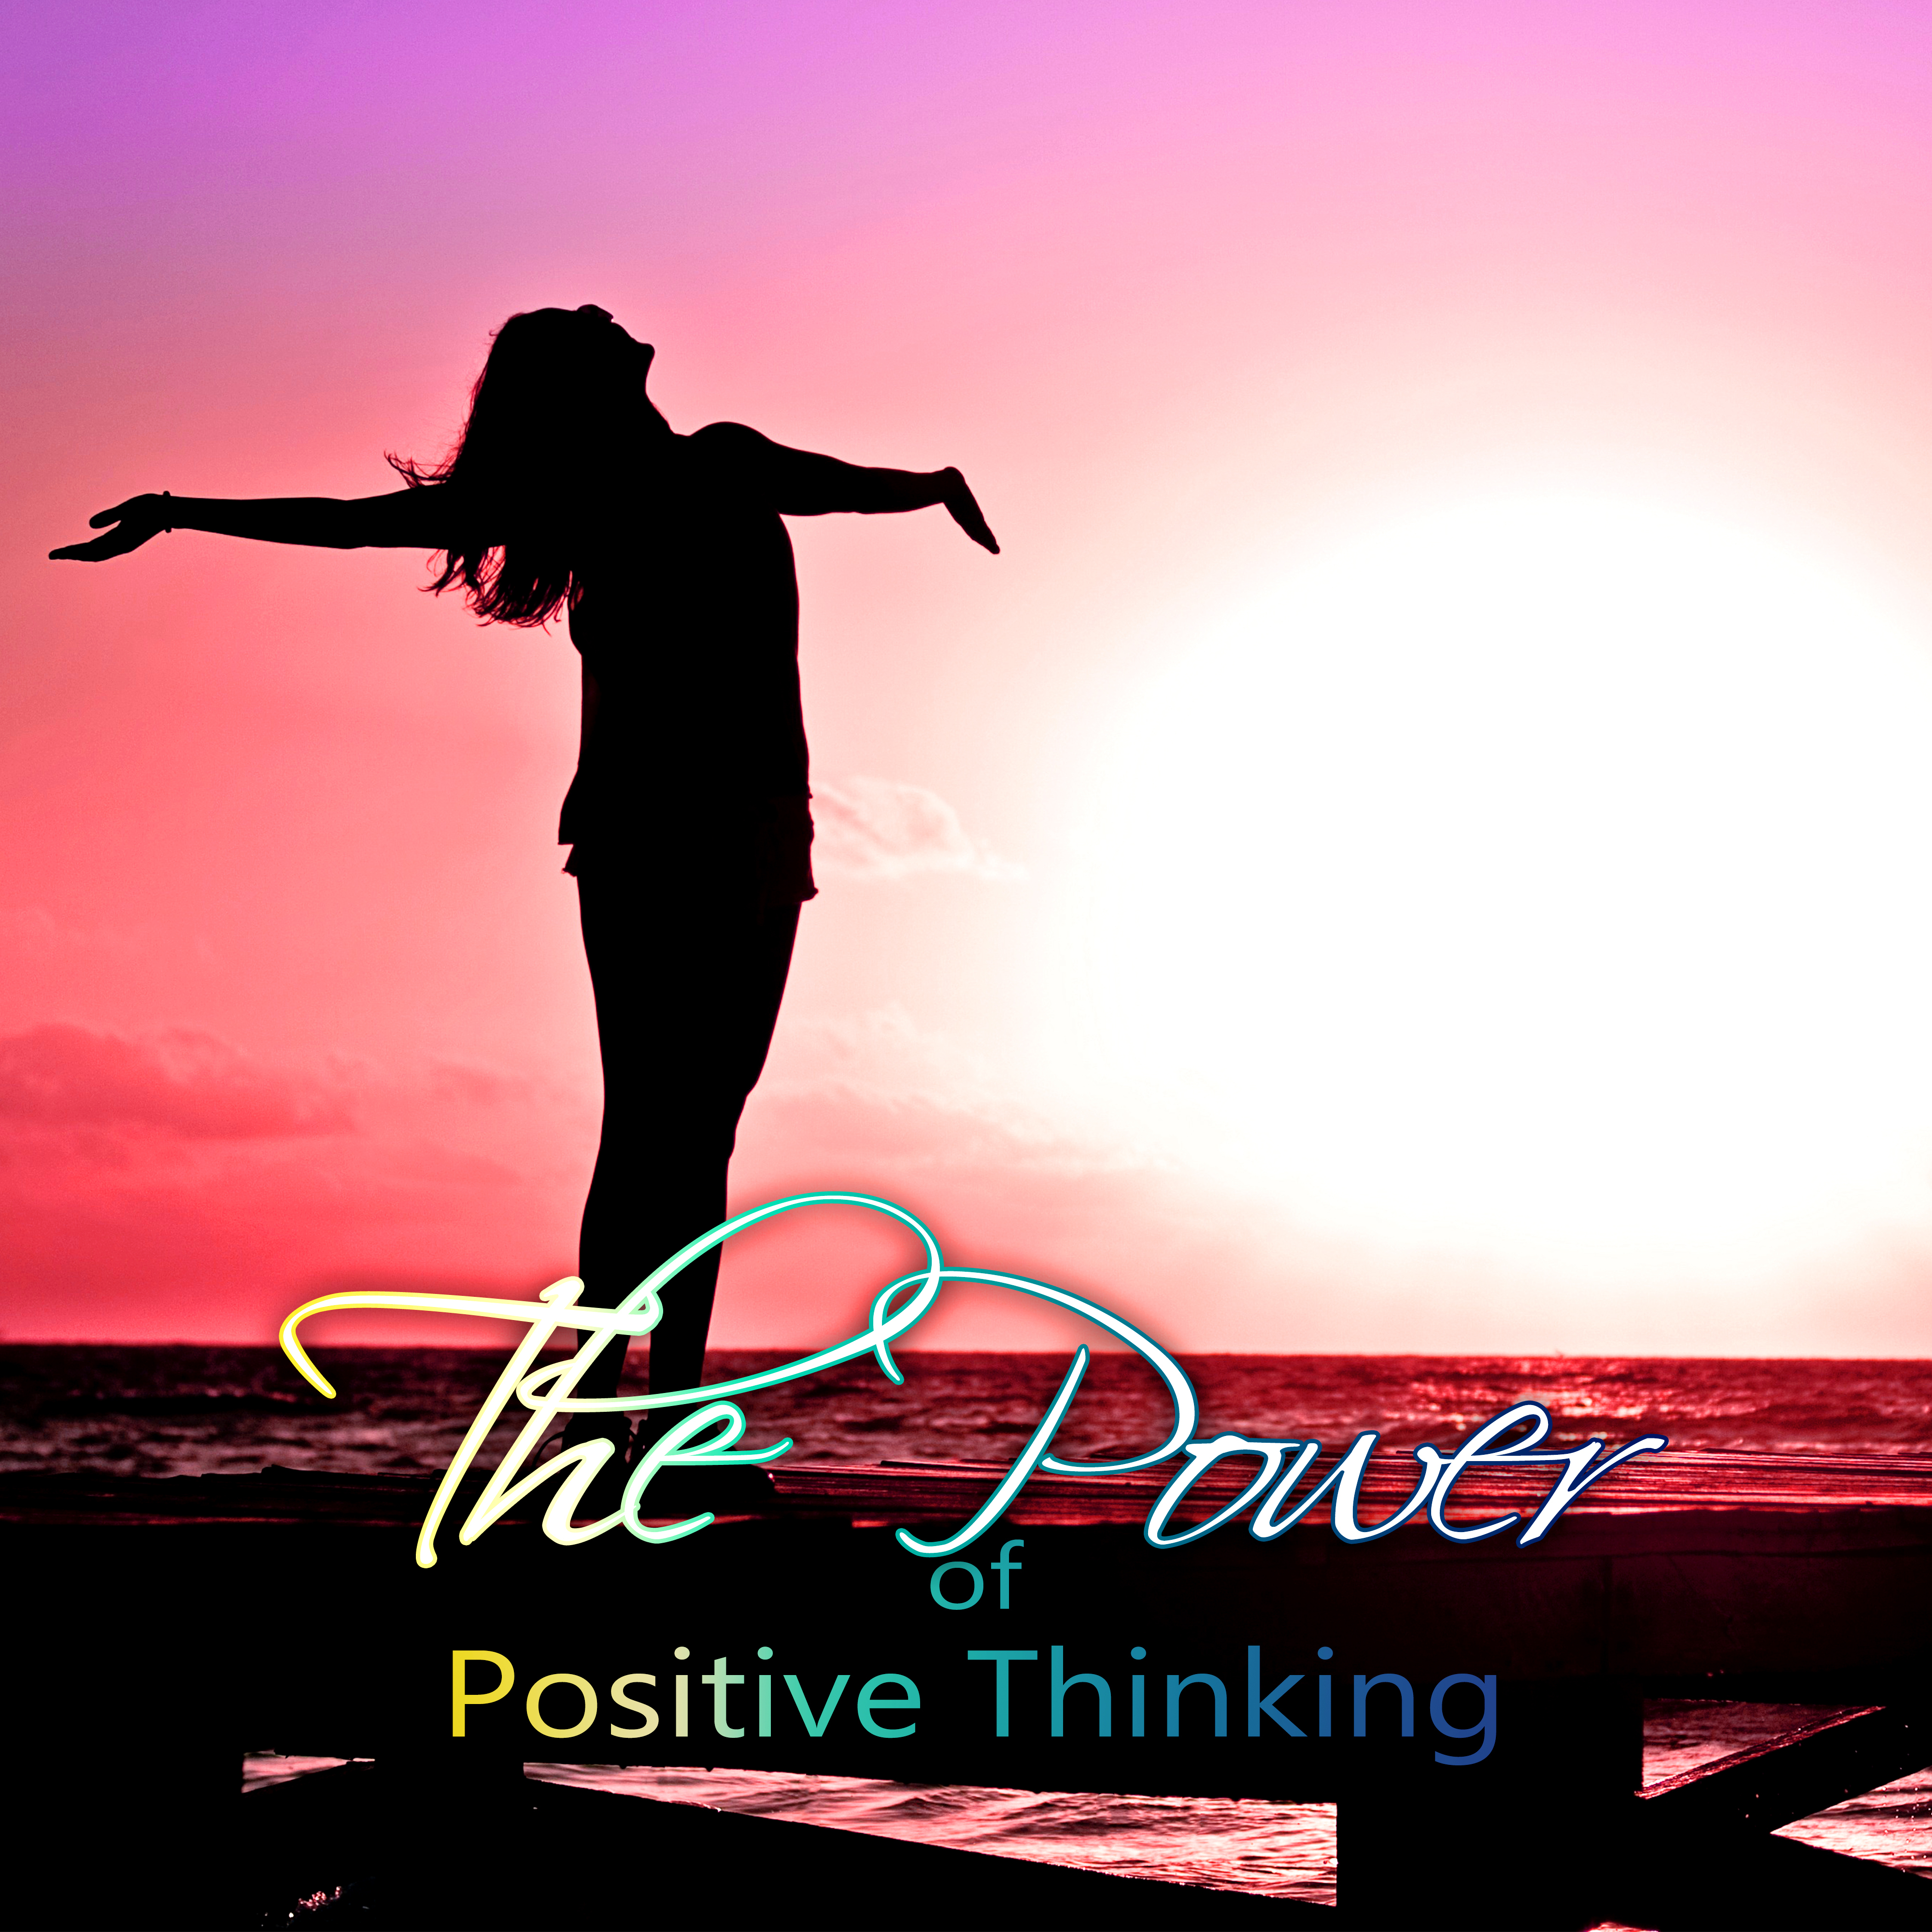 The Power of Positive Thinking - Healing Music Therapy, Piano Pieces for Deep Sleep, Relaxation Meditation, Asian Zen Spa, Shiatsu Massage, Chill & Relax, Wellness and Yoga